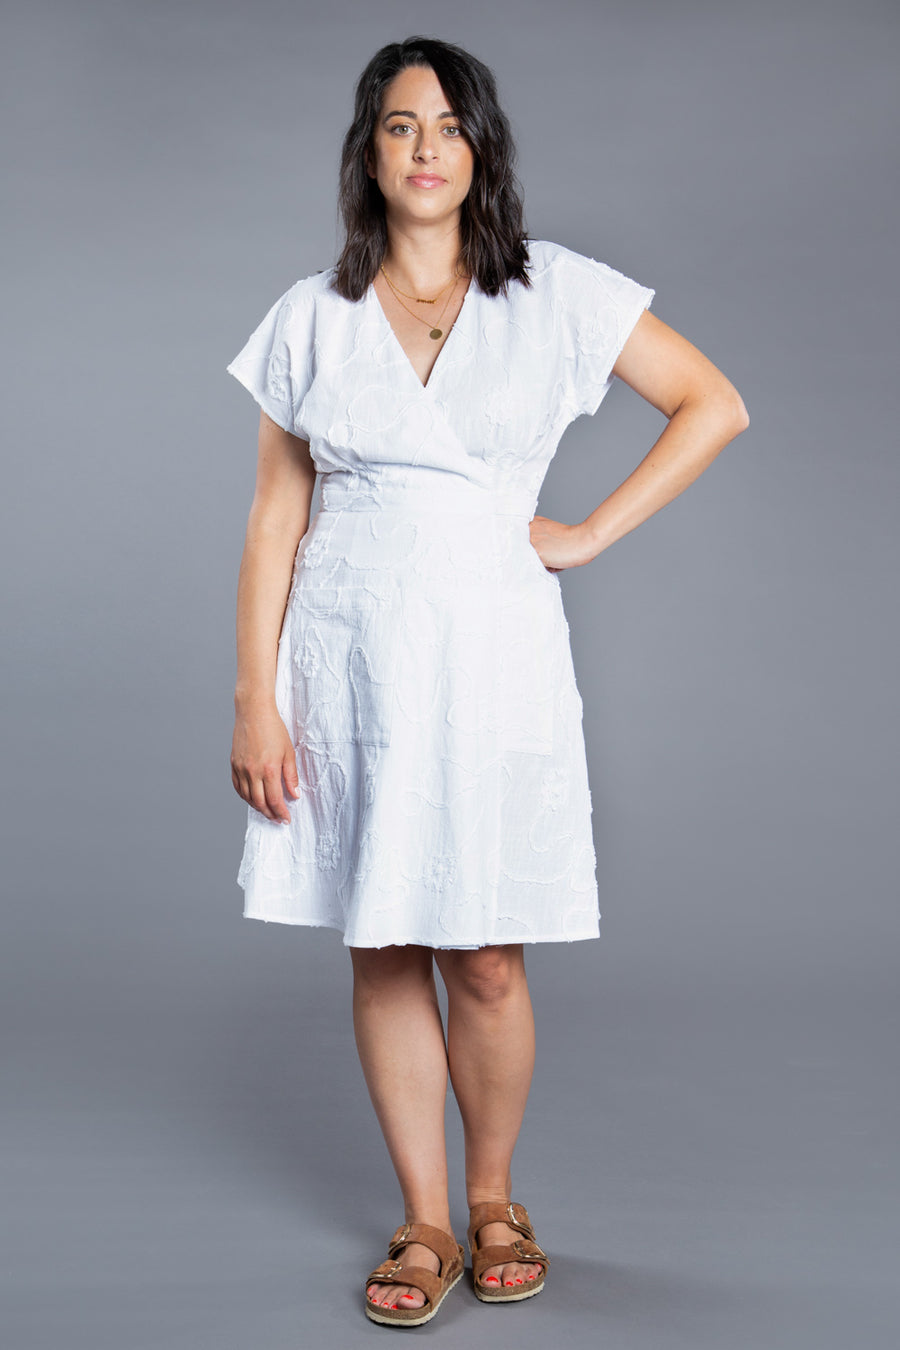 Wrap dress with button closure Women Clothing Dress Sewing Pattern